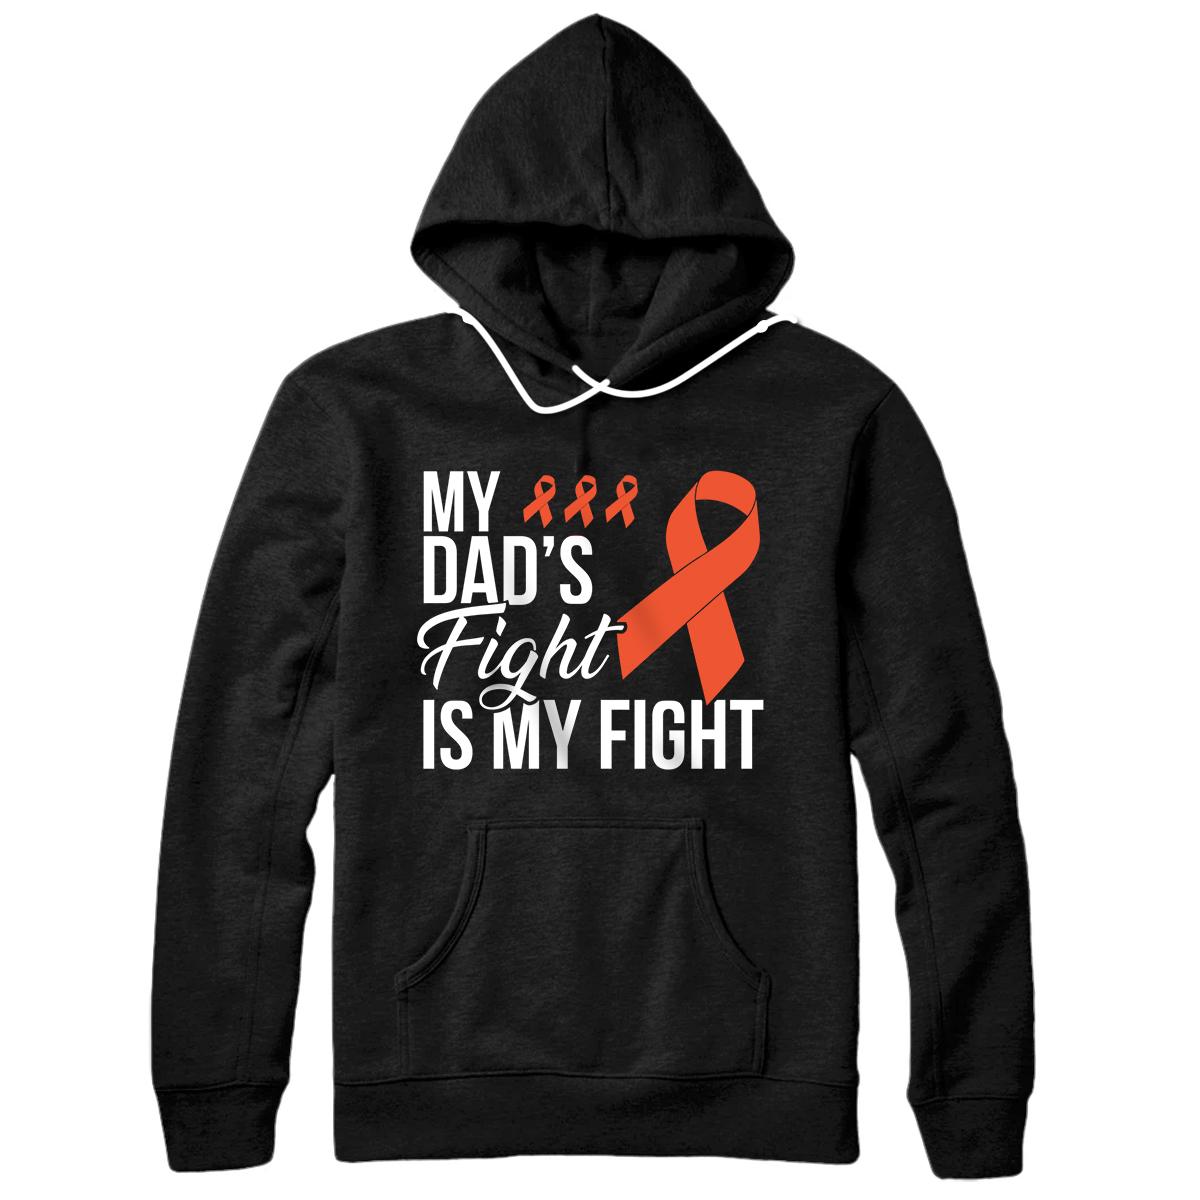 Personalized Kidney Cancer Awareness Fight Cancer Ribbon Pullover Hoodie